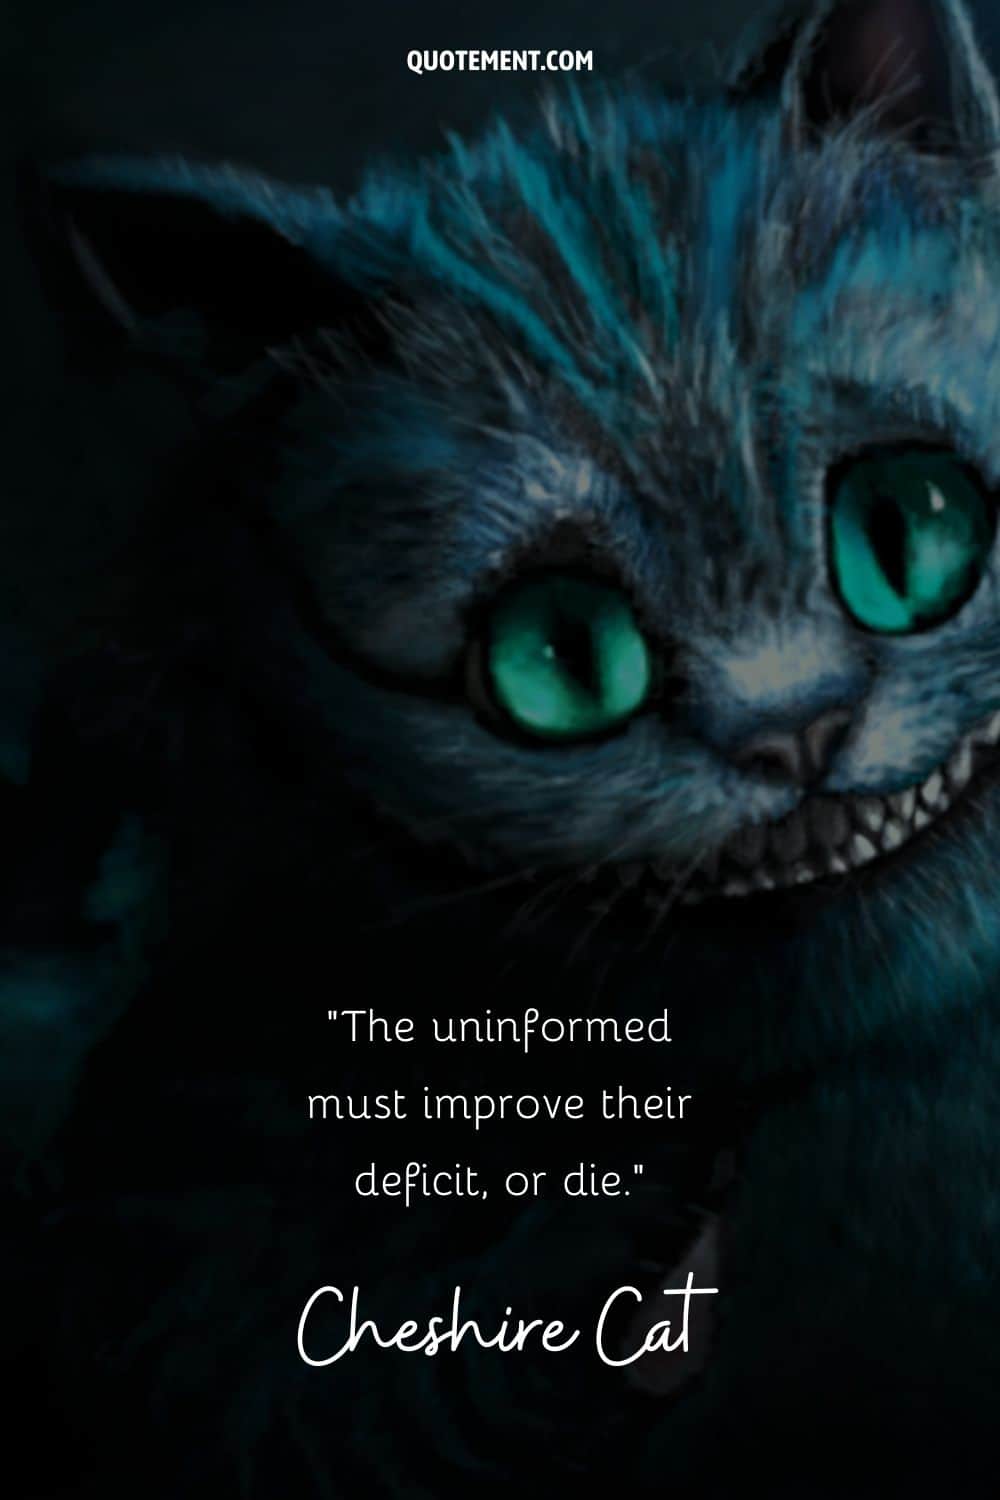 Intriguing quote from the Cheshire Cat and its image in the background